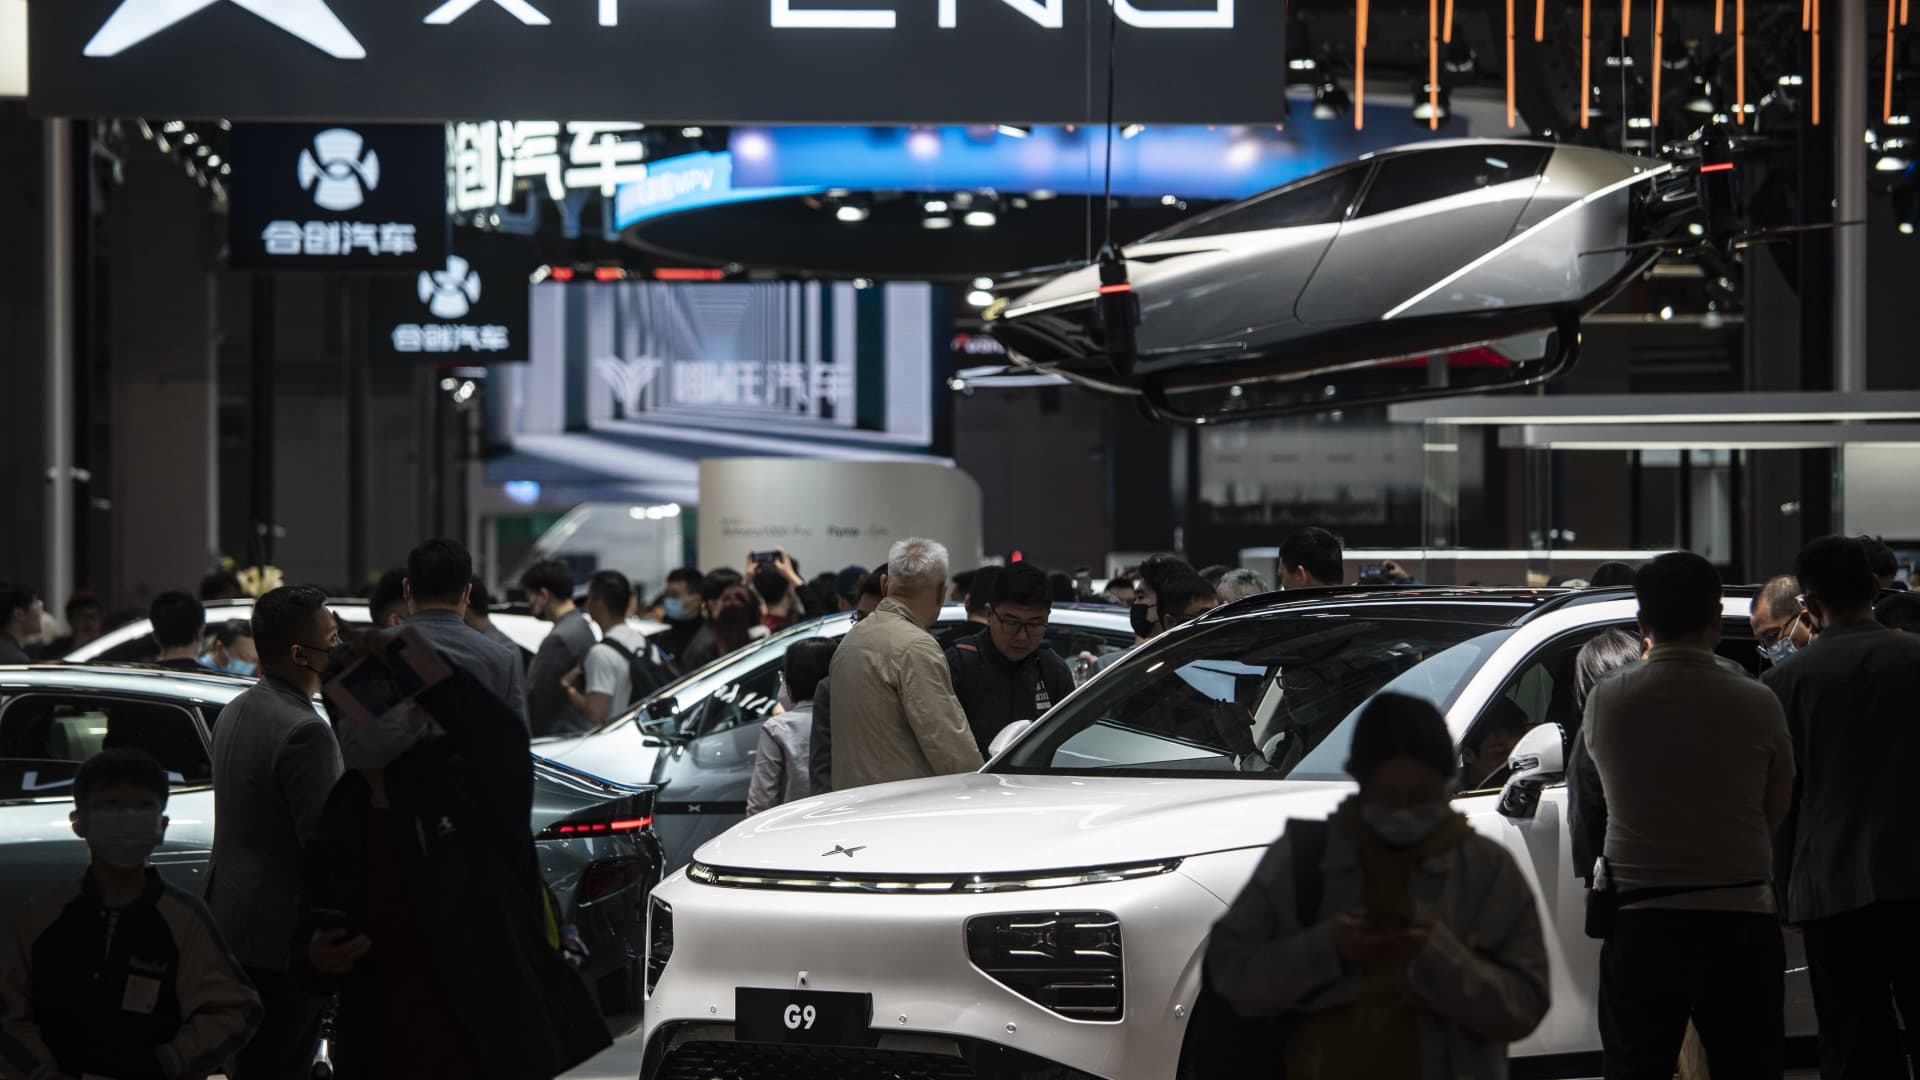 China's Xpeng claims its latest EV model could be an industry 'game changer'